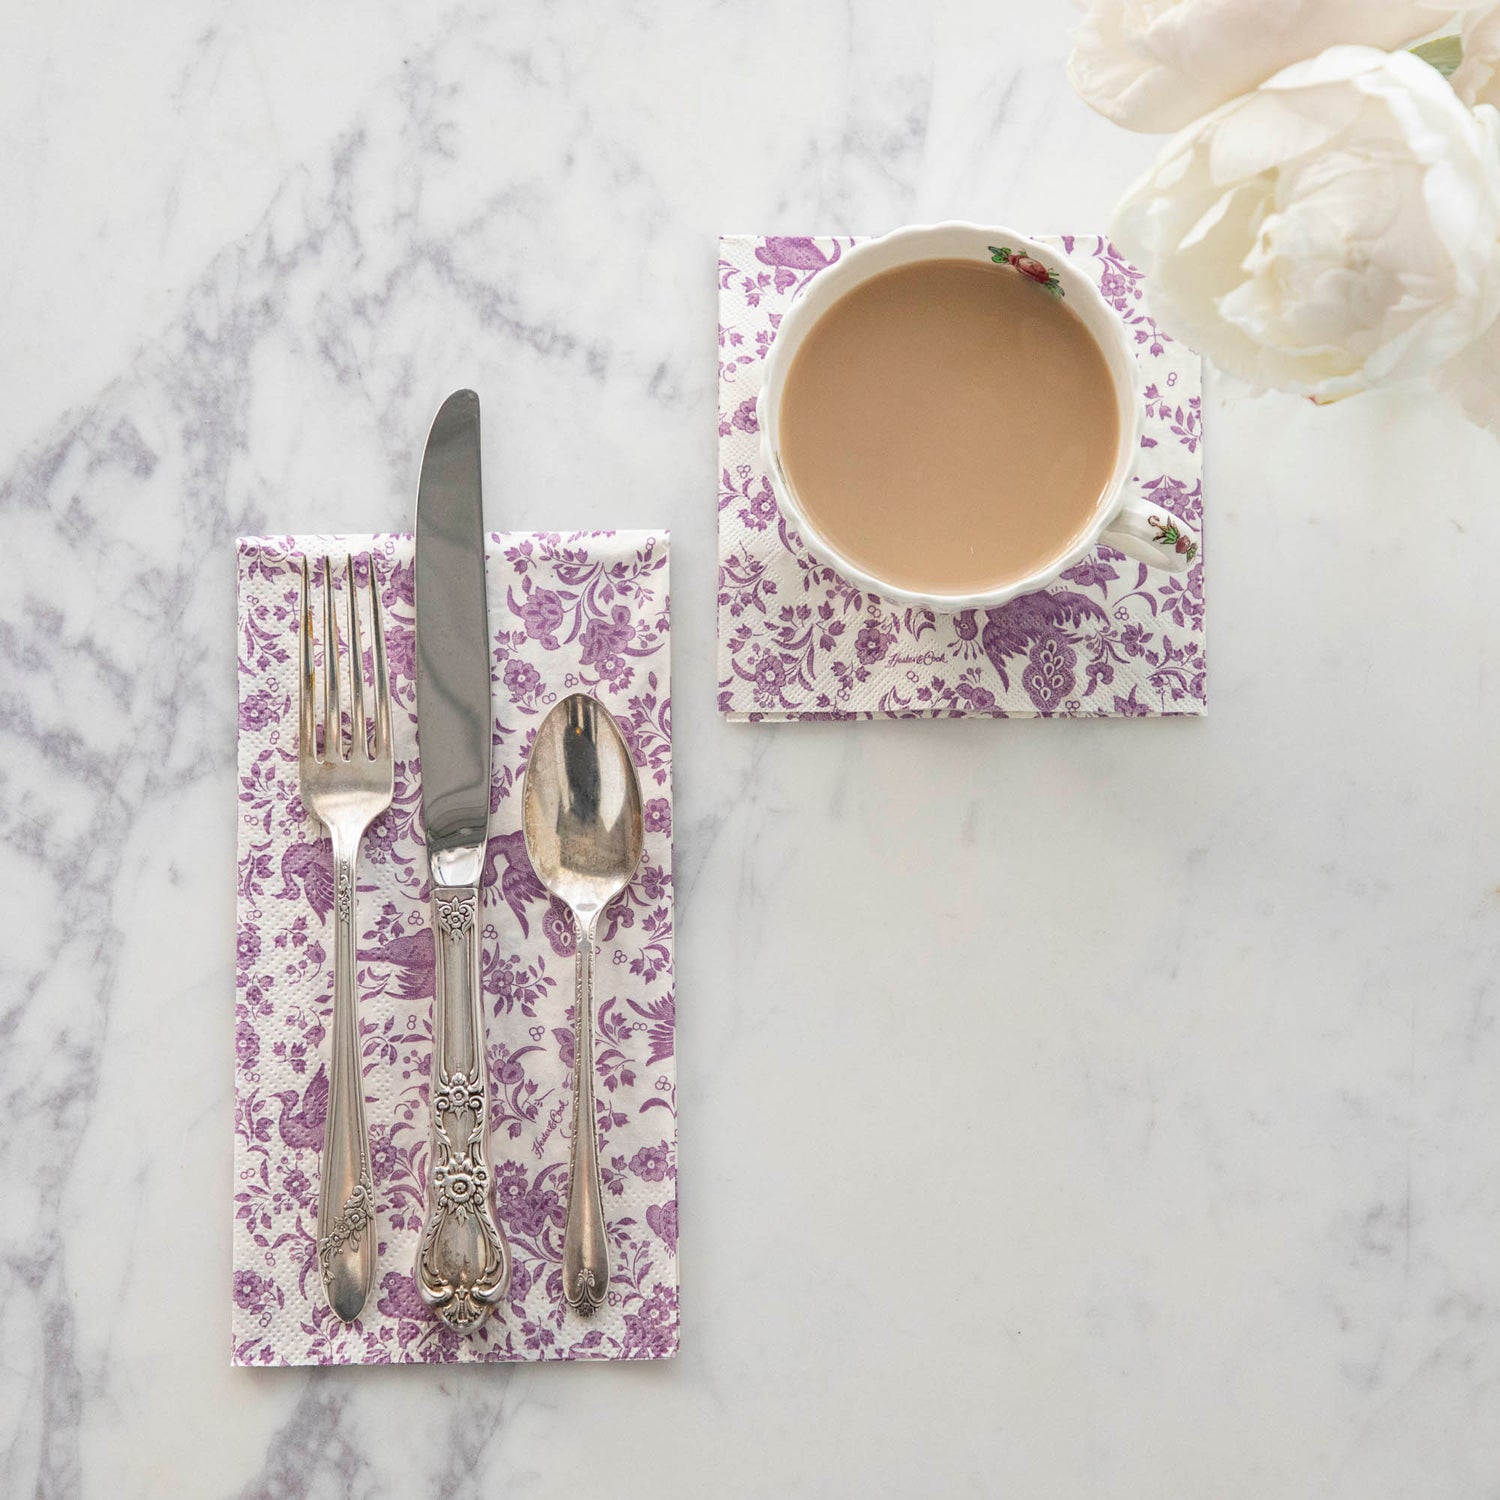 A cup of coffee and silverware on Lilac Regal Peacock Napkins by Hester &amp; Cook.